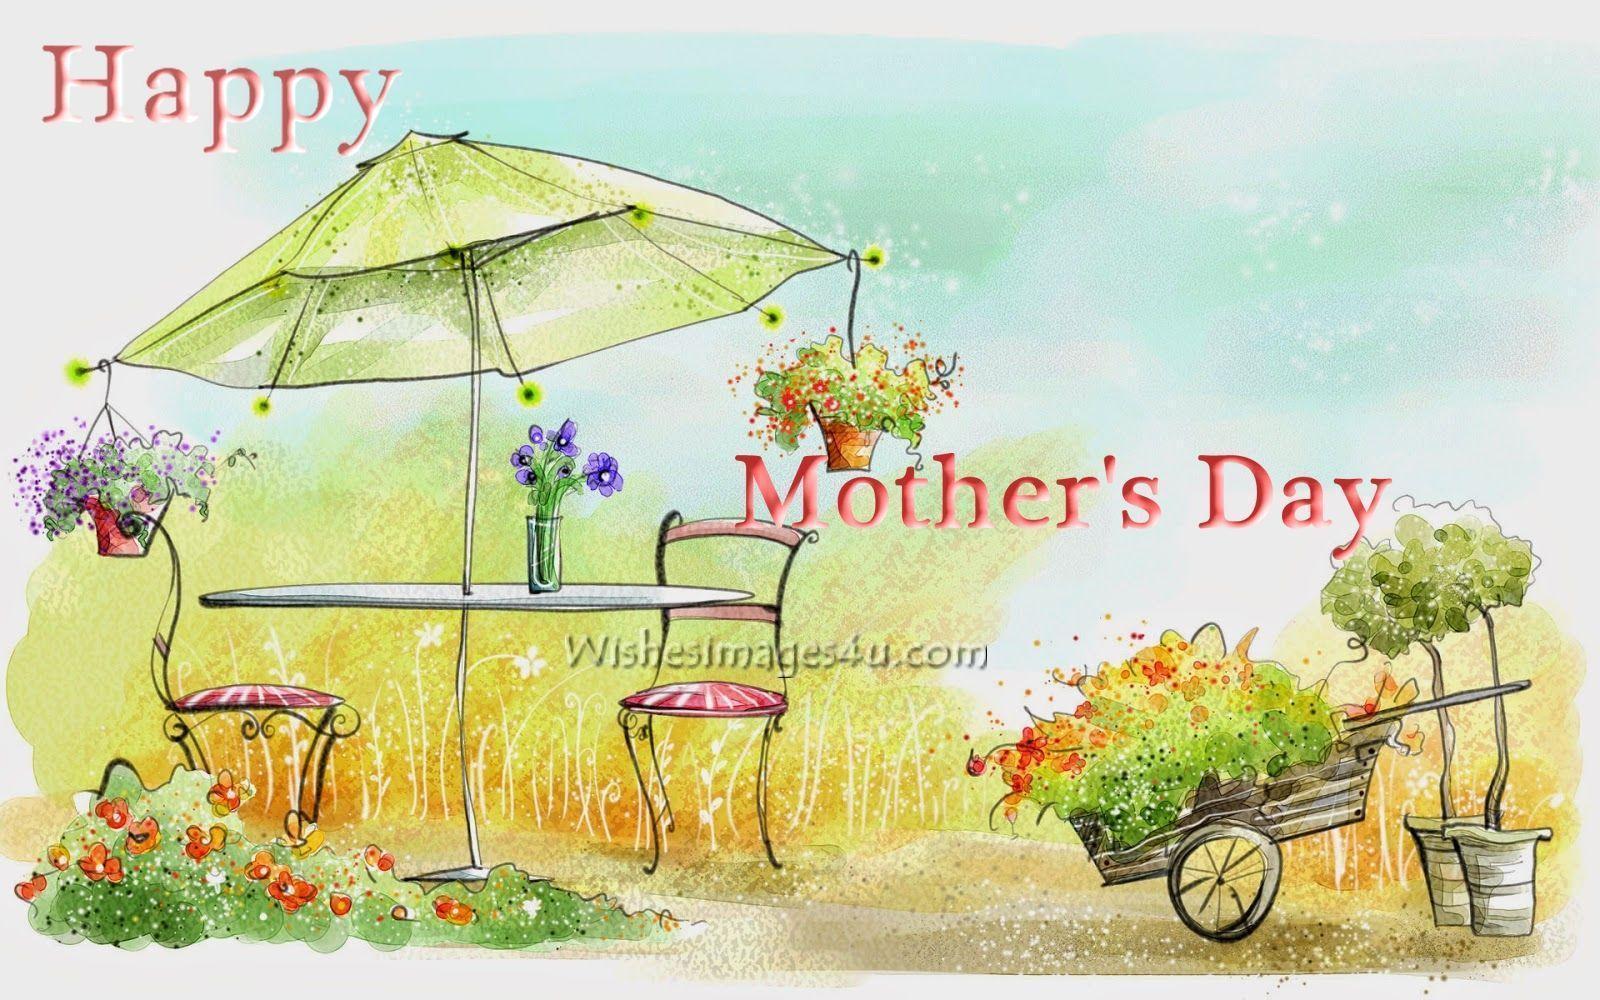 Mother&;s Day 2017 HD Wallpaper. Beautiful Mother&;s Day HD